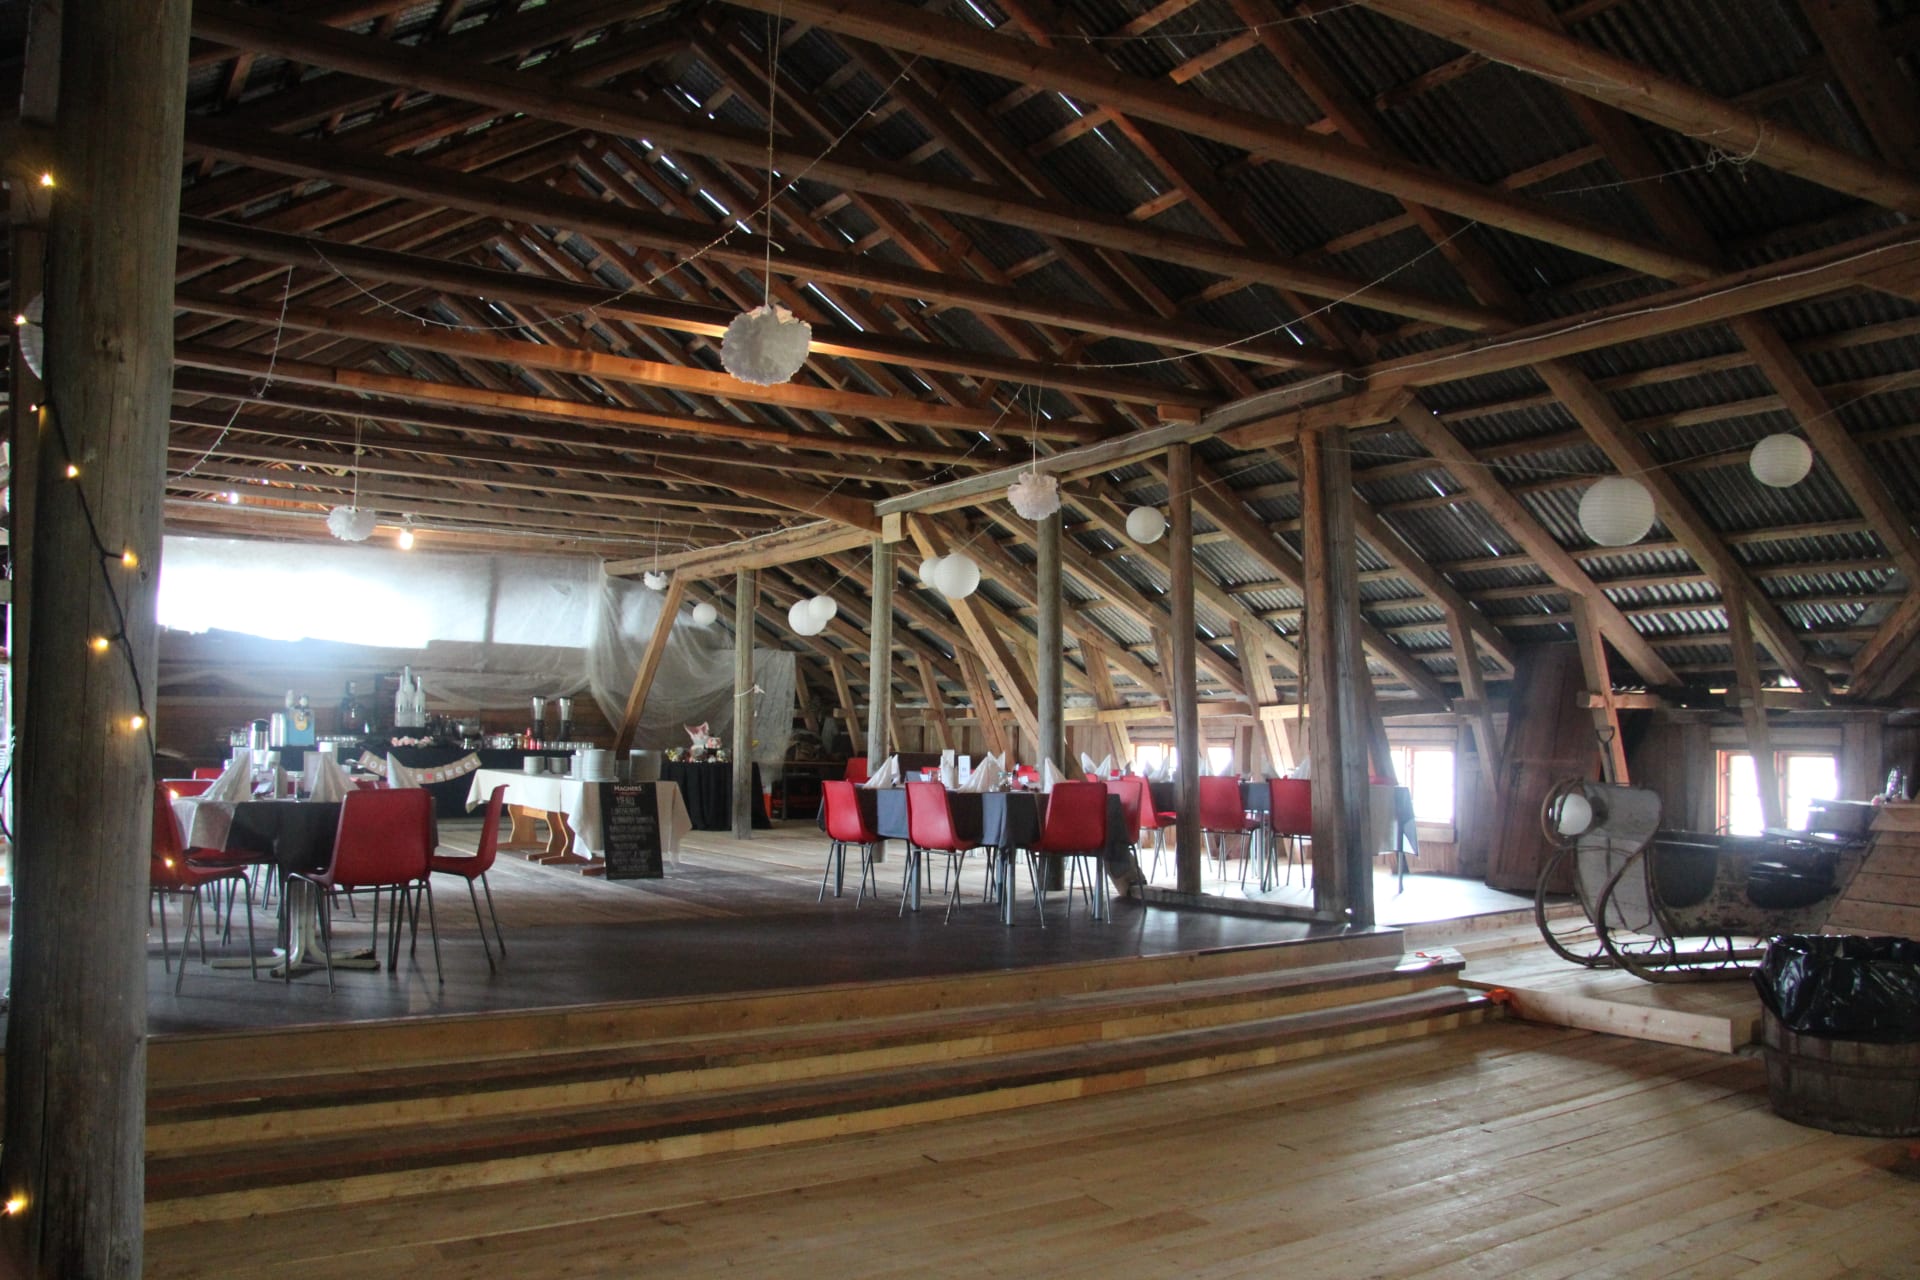 Old Cattle Barn Party Room.